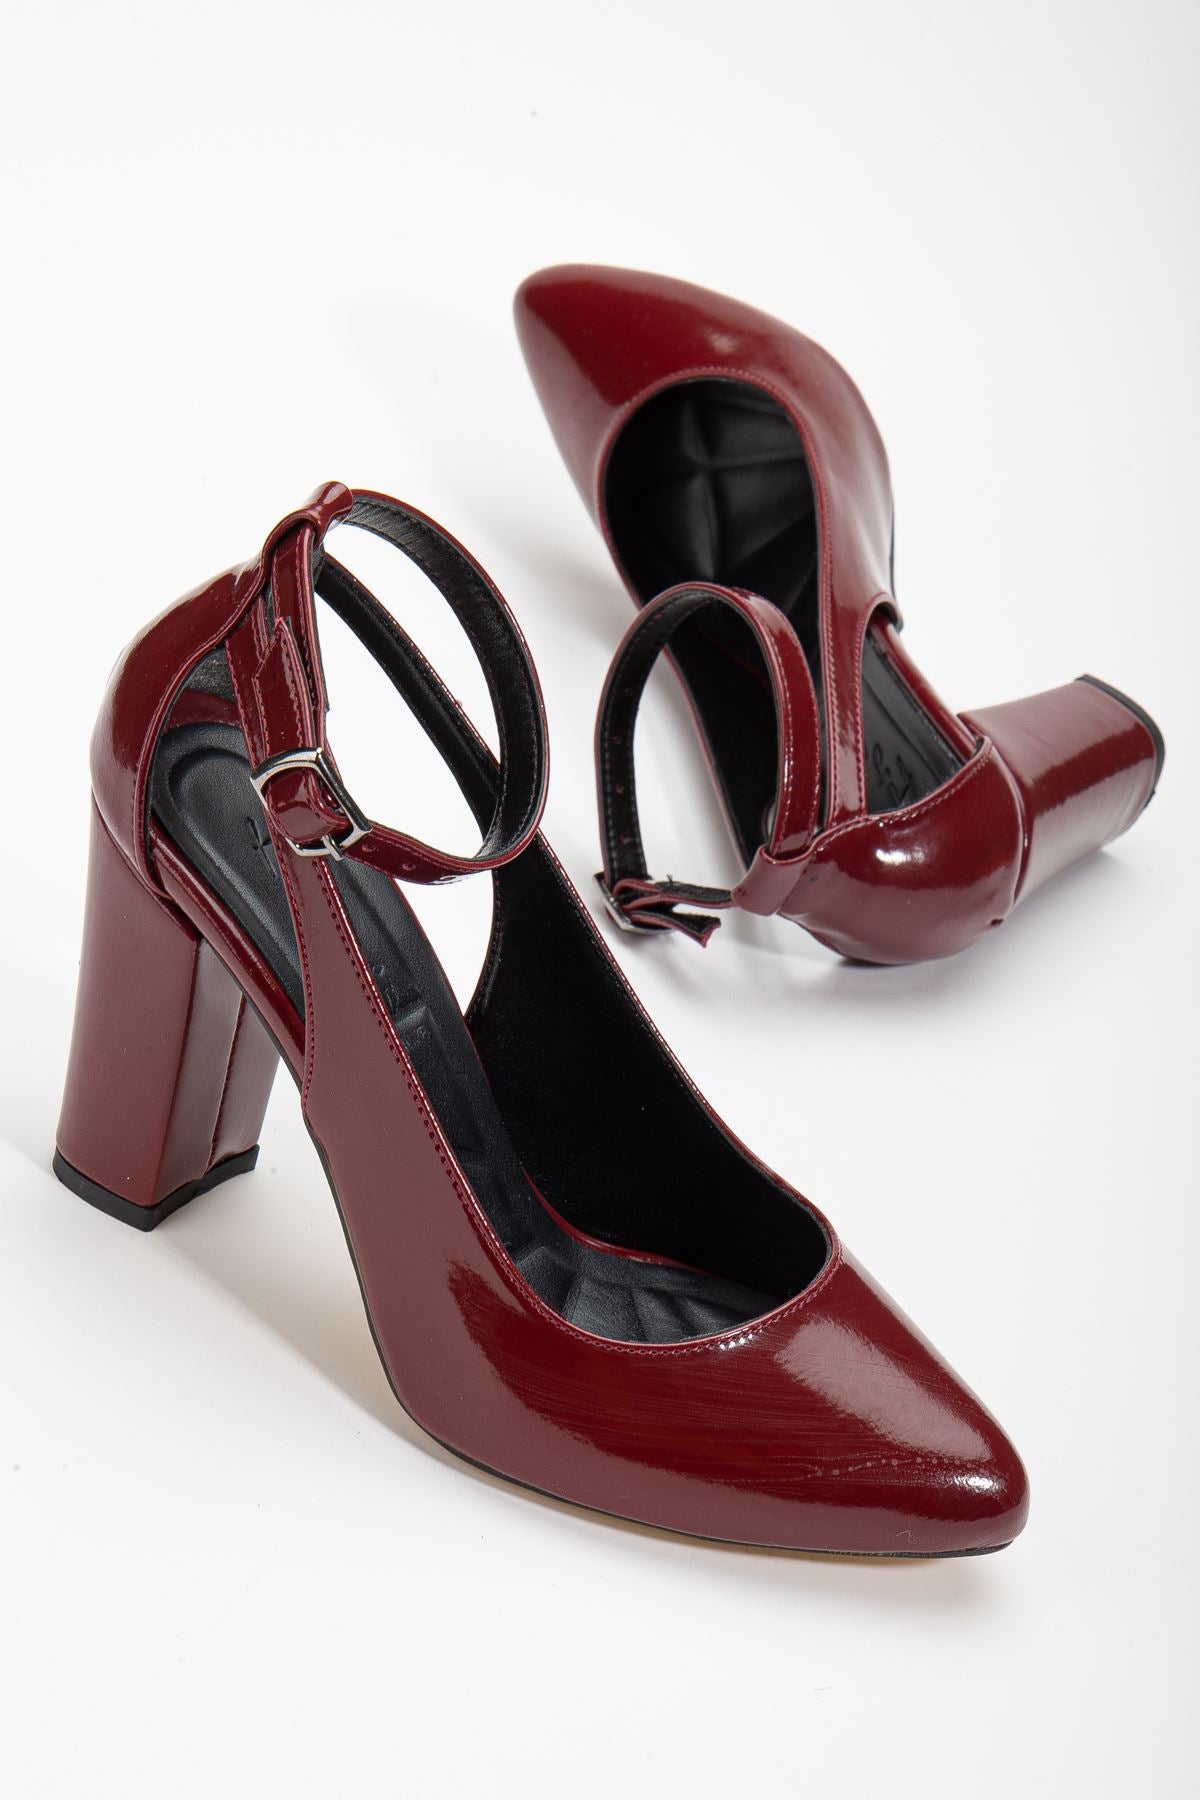 Lillian Heeled Burgundy Patent Leather Heeled Women's Shoes - STREETMODE ™